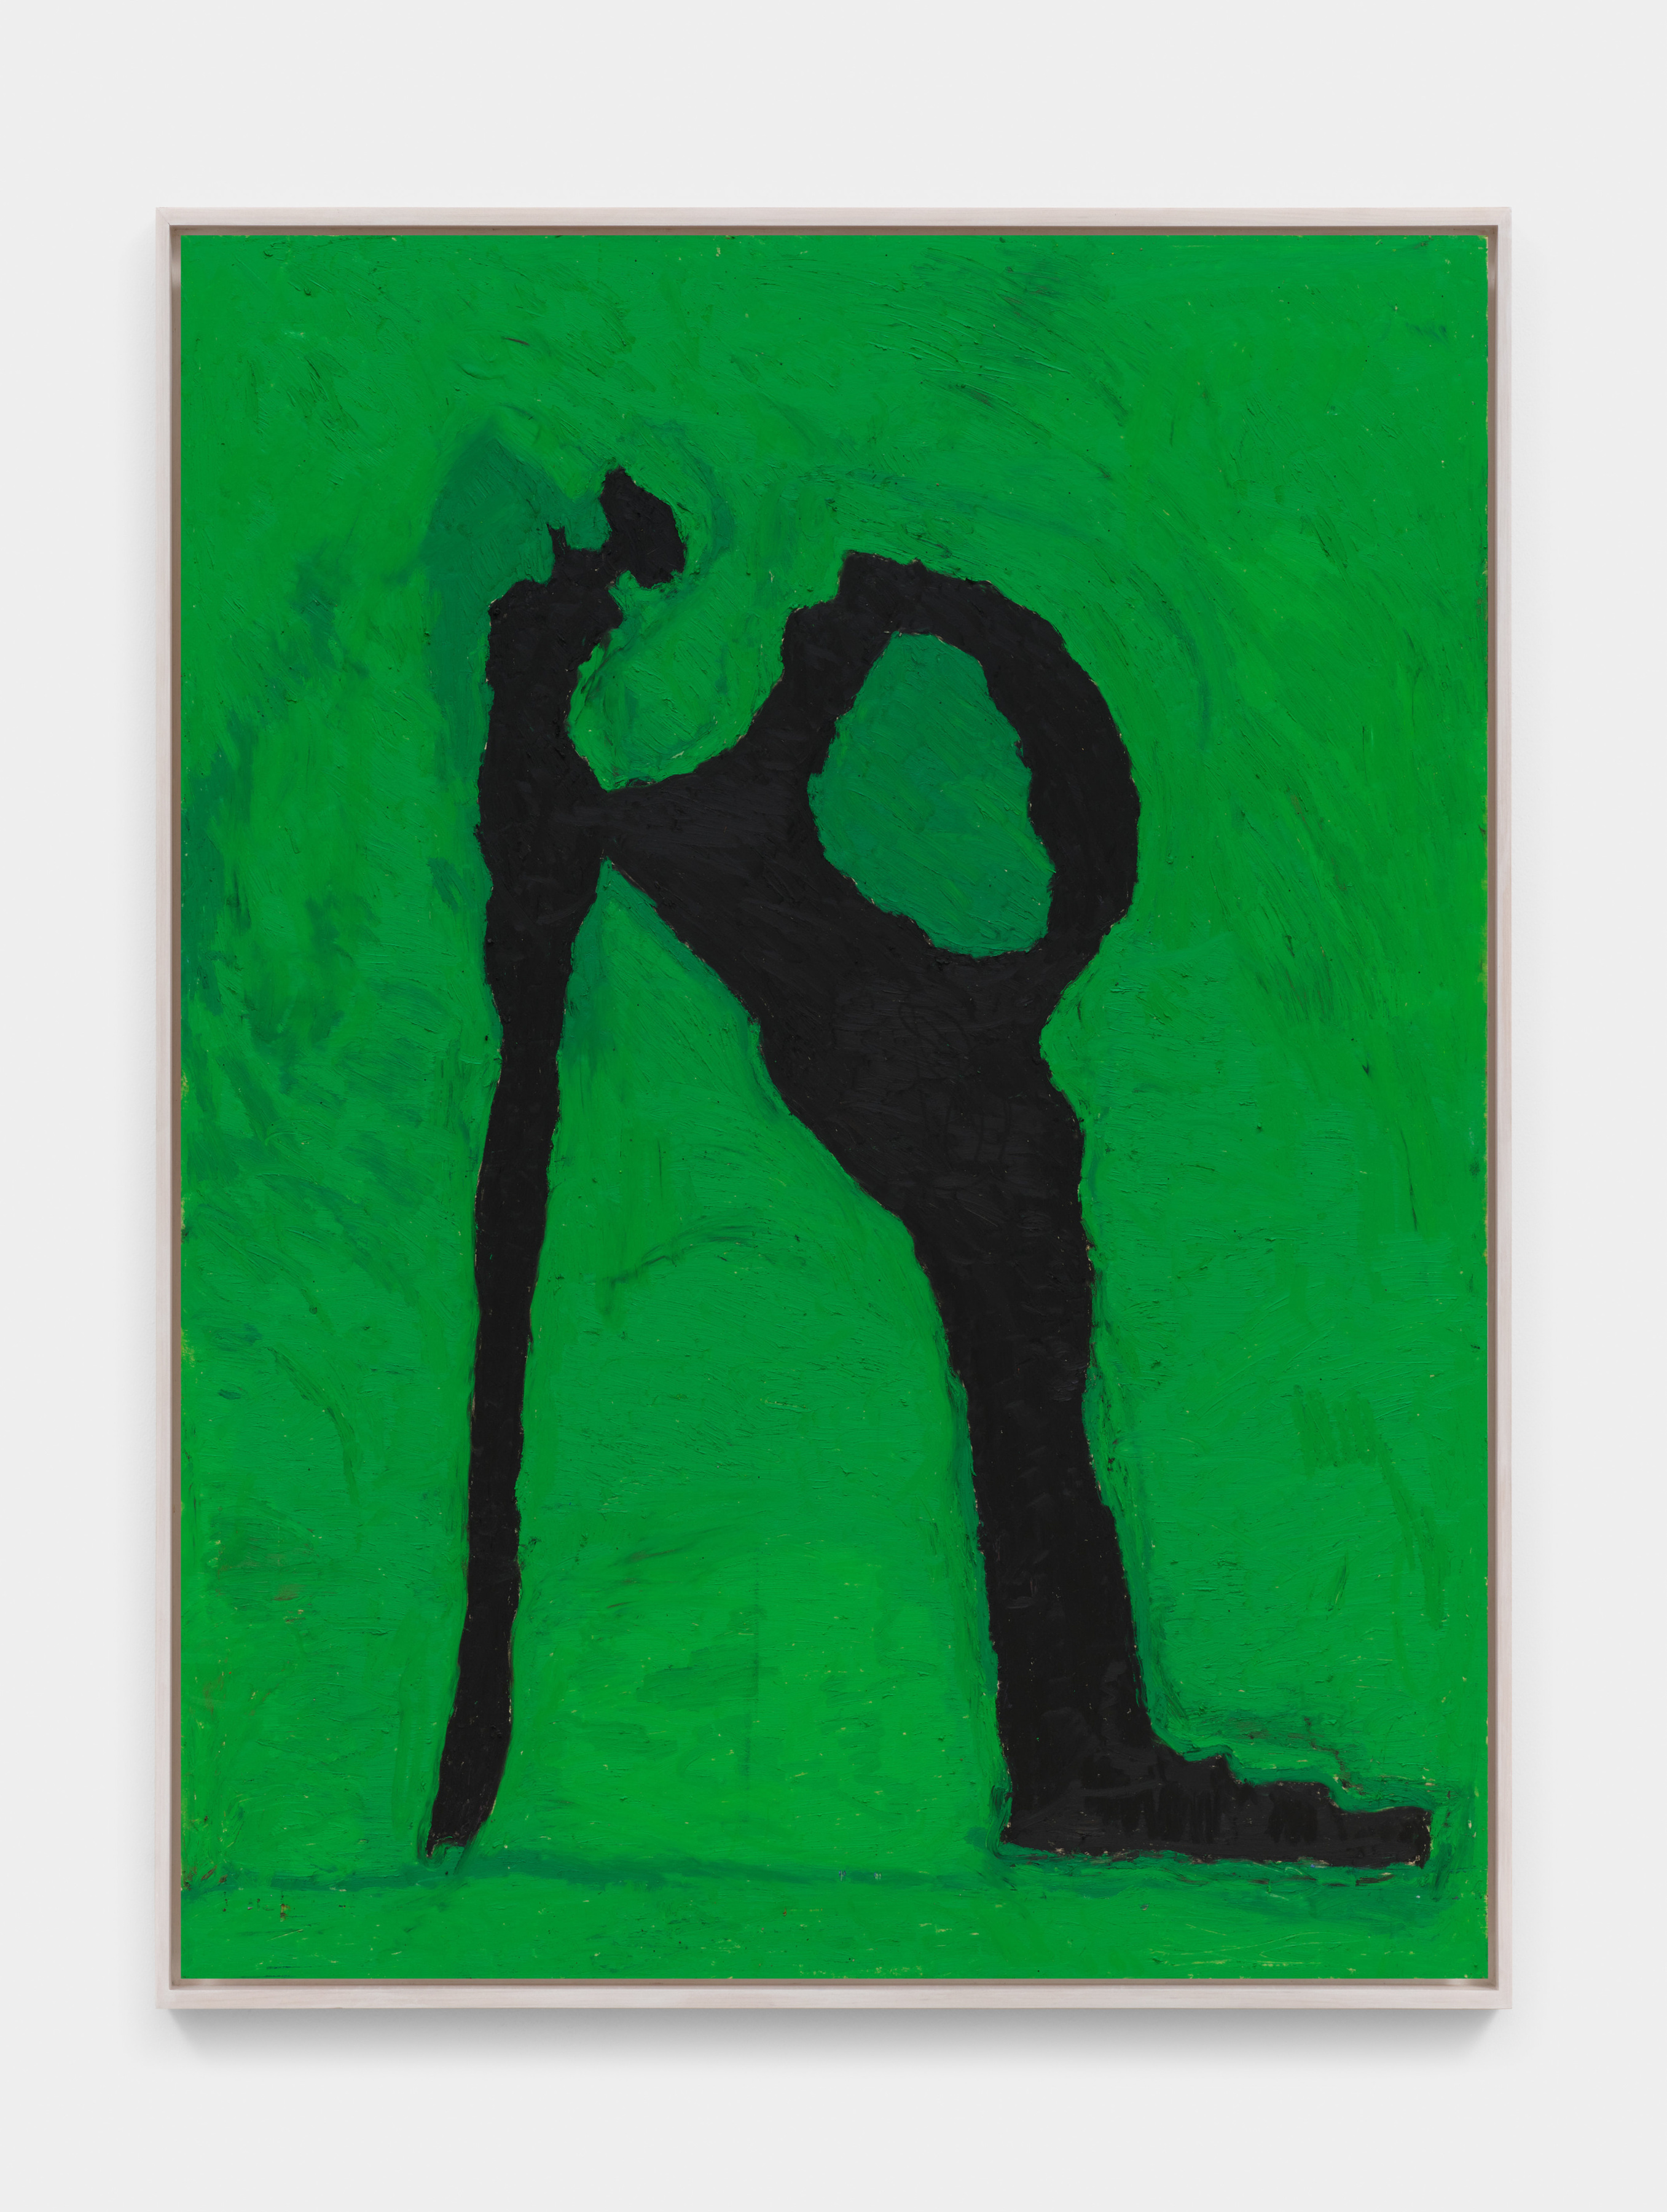 An oil stick on wood panel painting of an abstract anthropomorphic leg like shape rendered in jet black against an emerald green background.